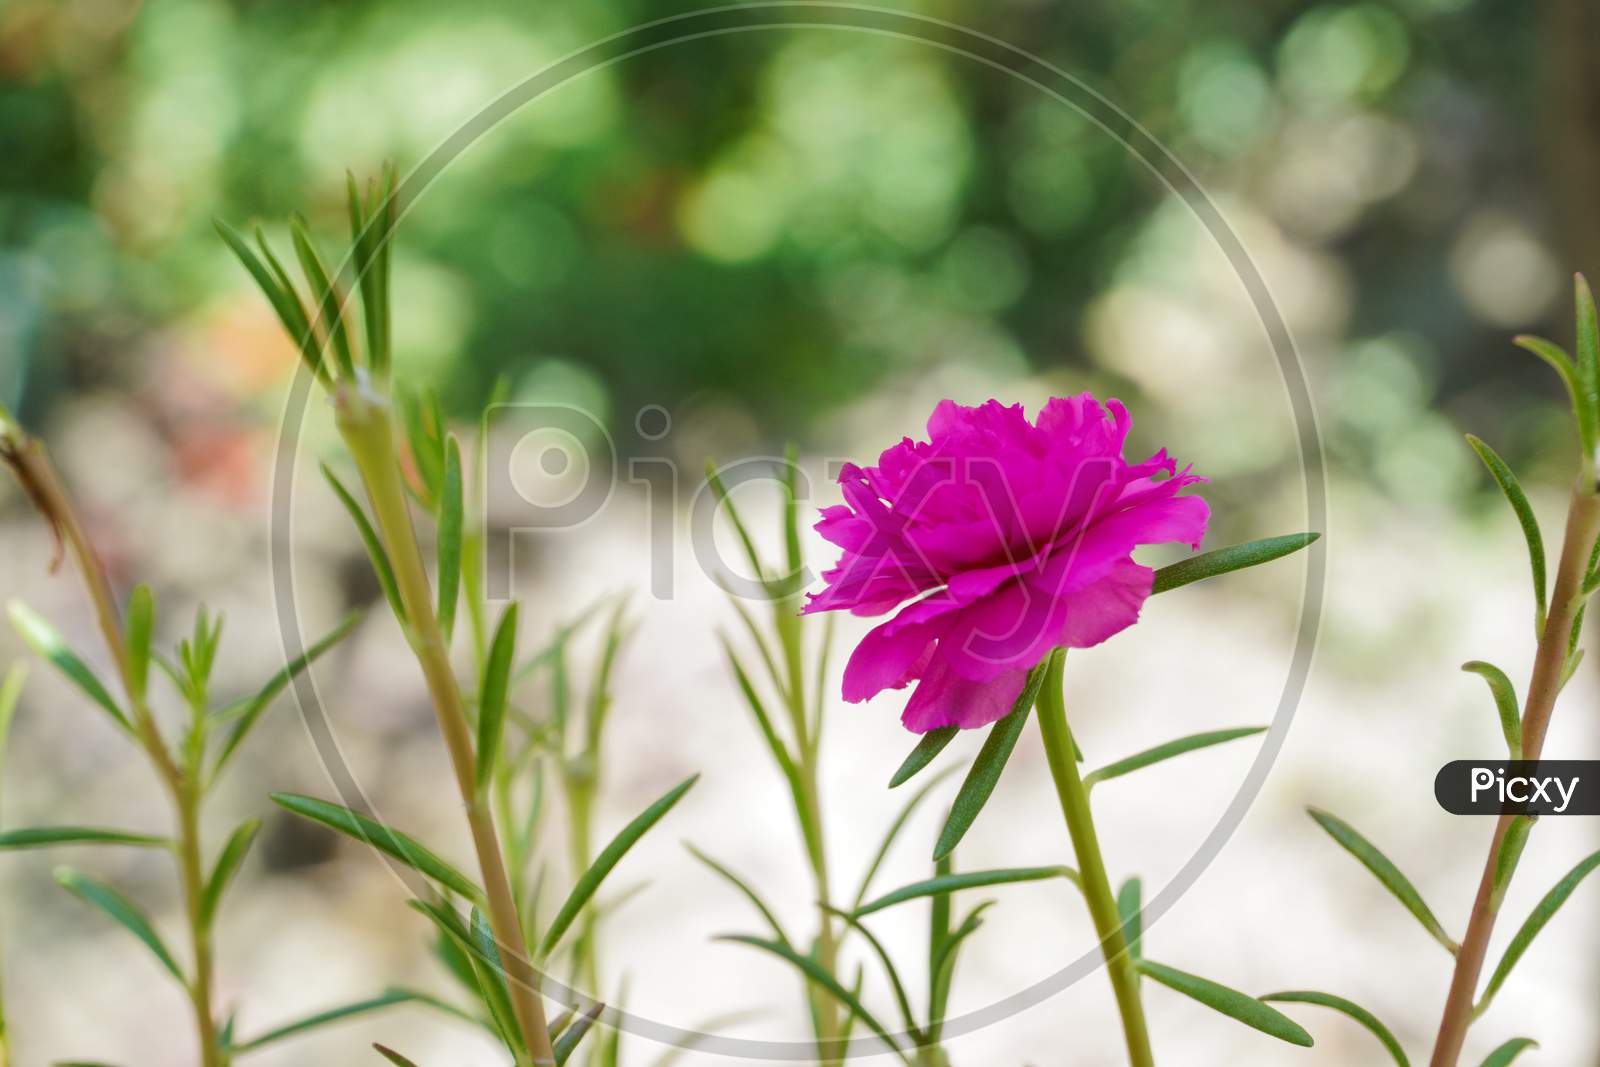 A pink color frees flower in the park